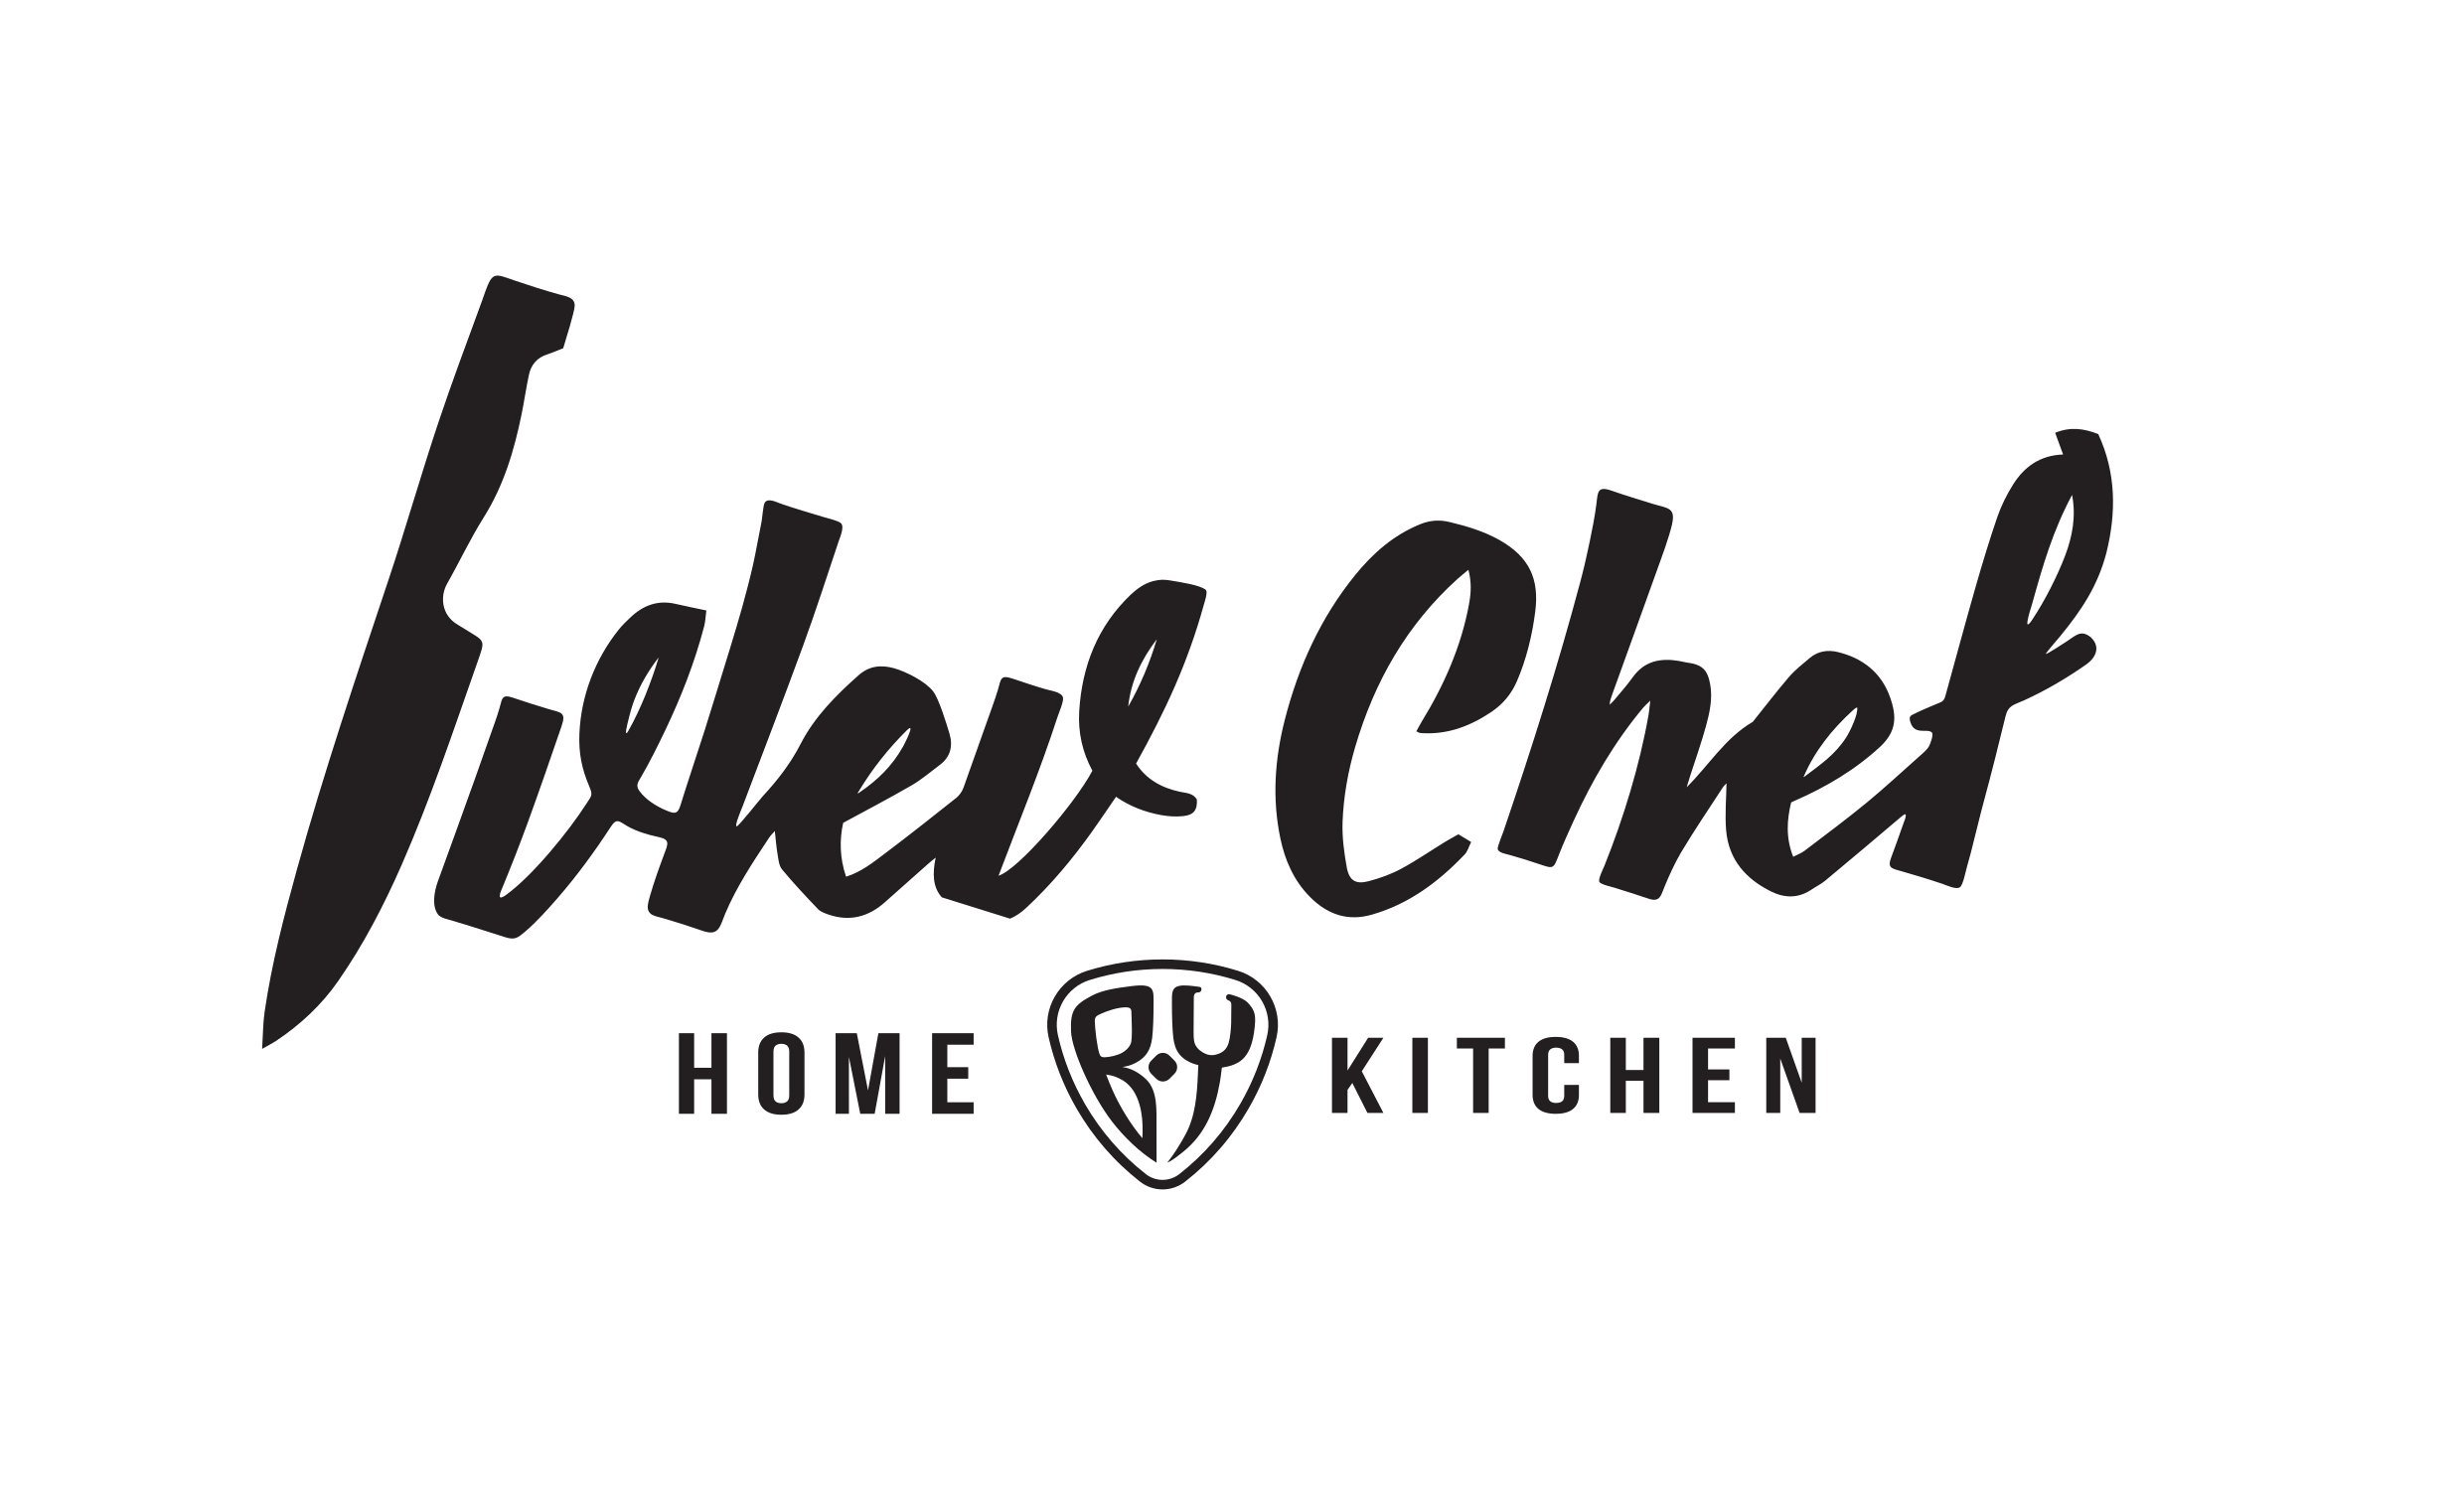 Ivlev Chef Home by Kitchen